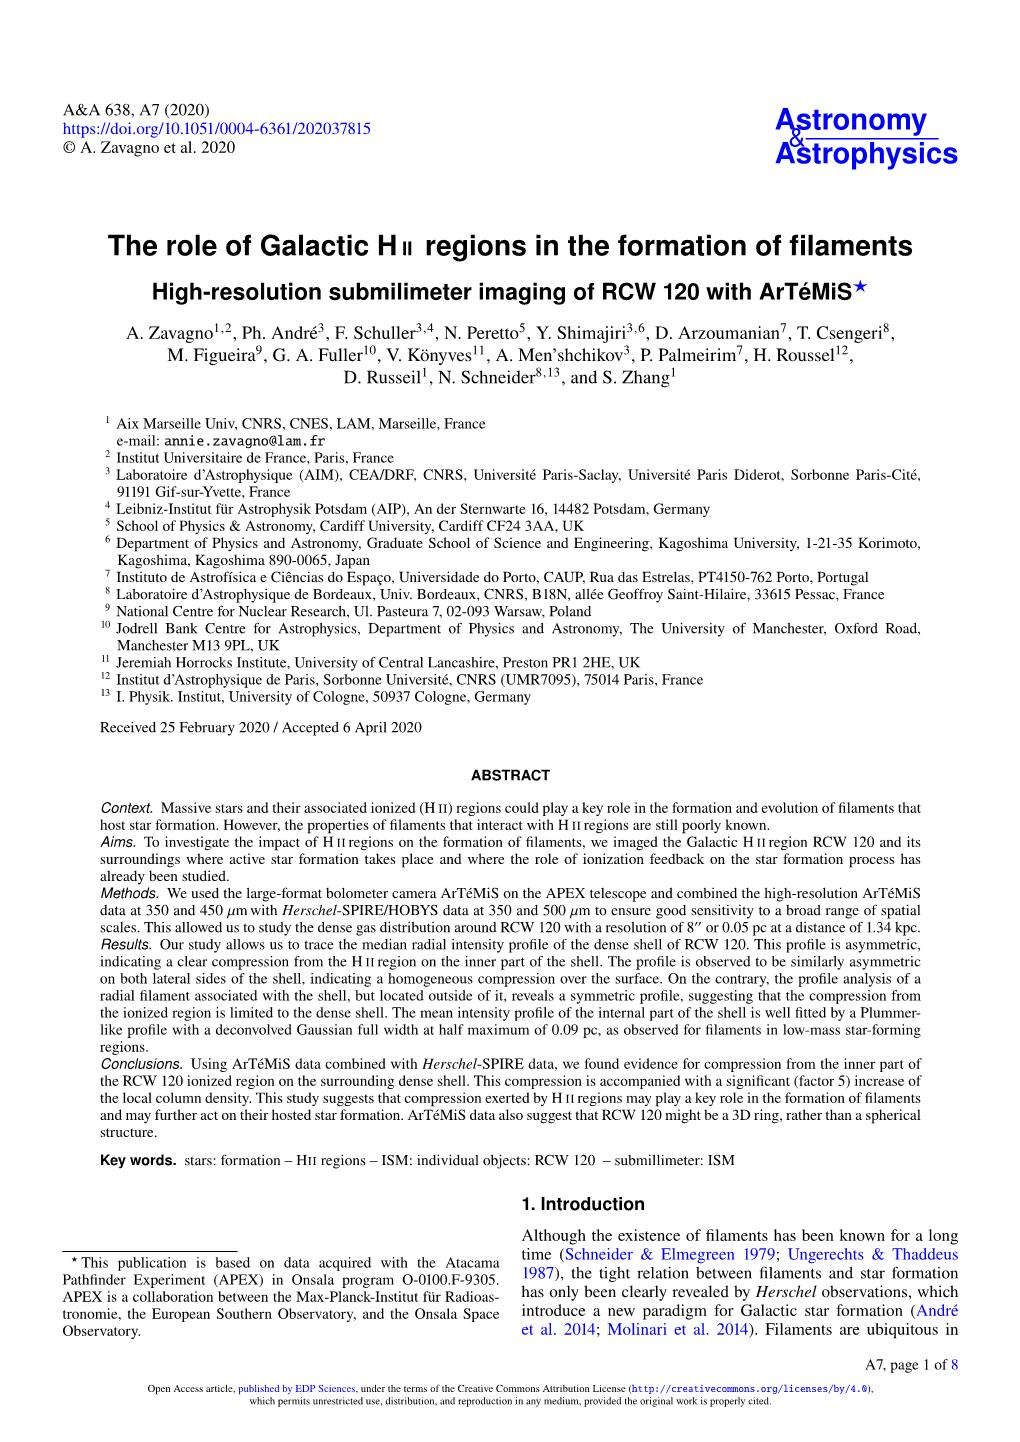 The Role of Galactic H II Regions in the Formation of Filaments